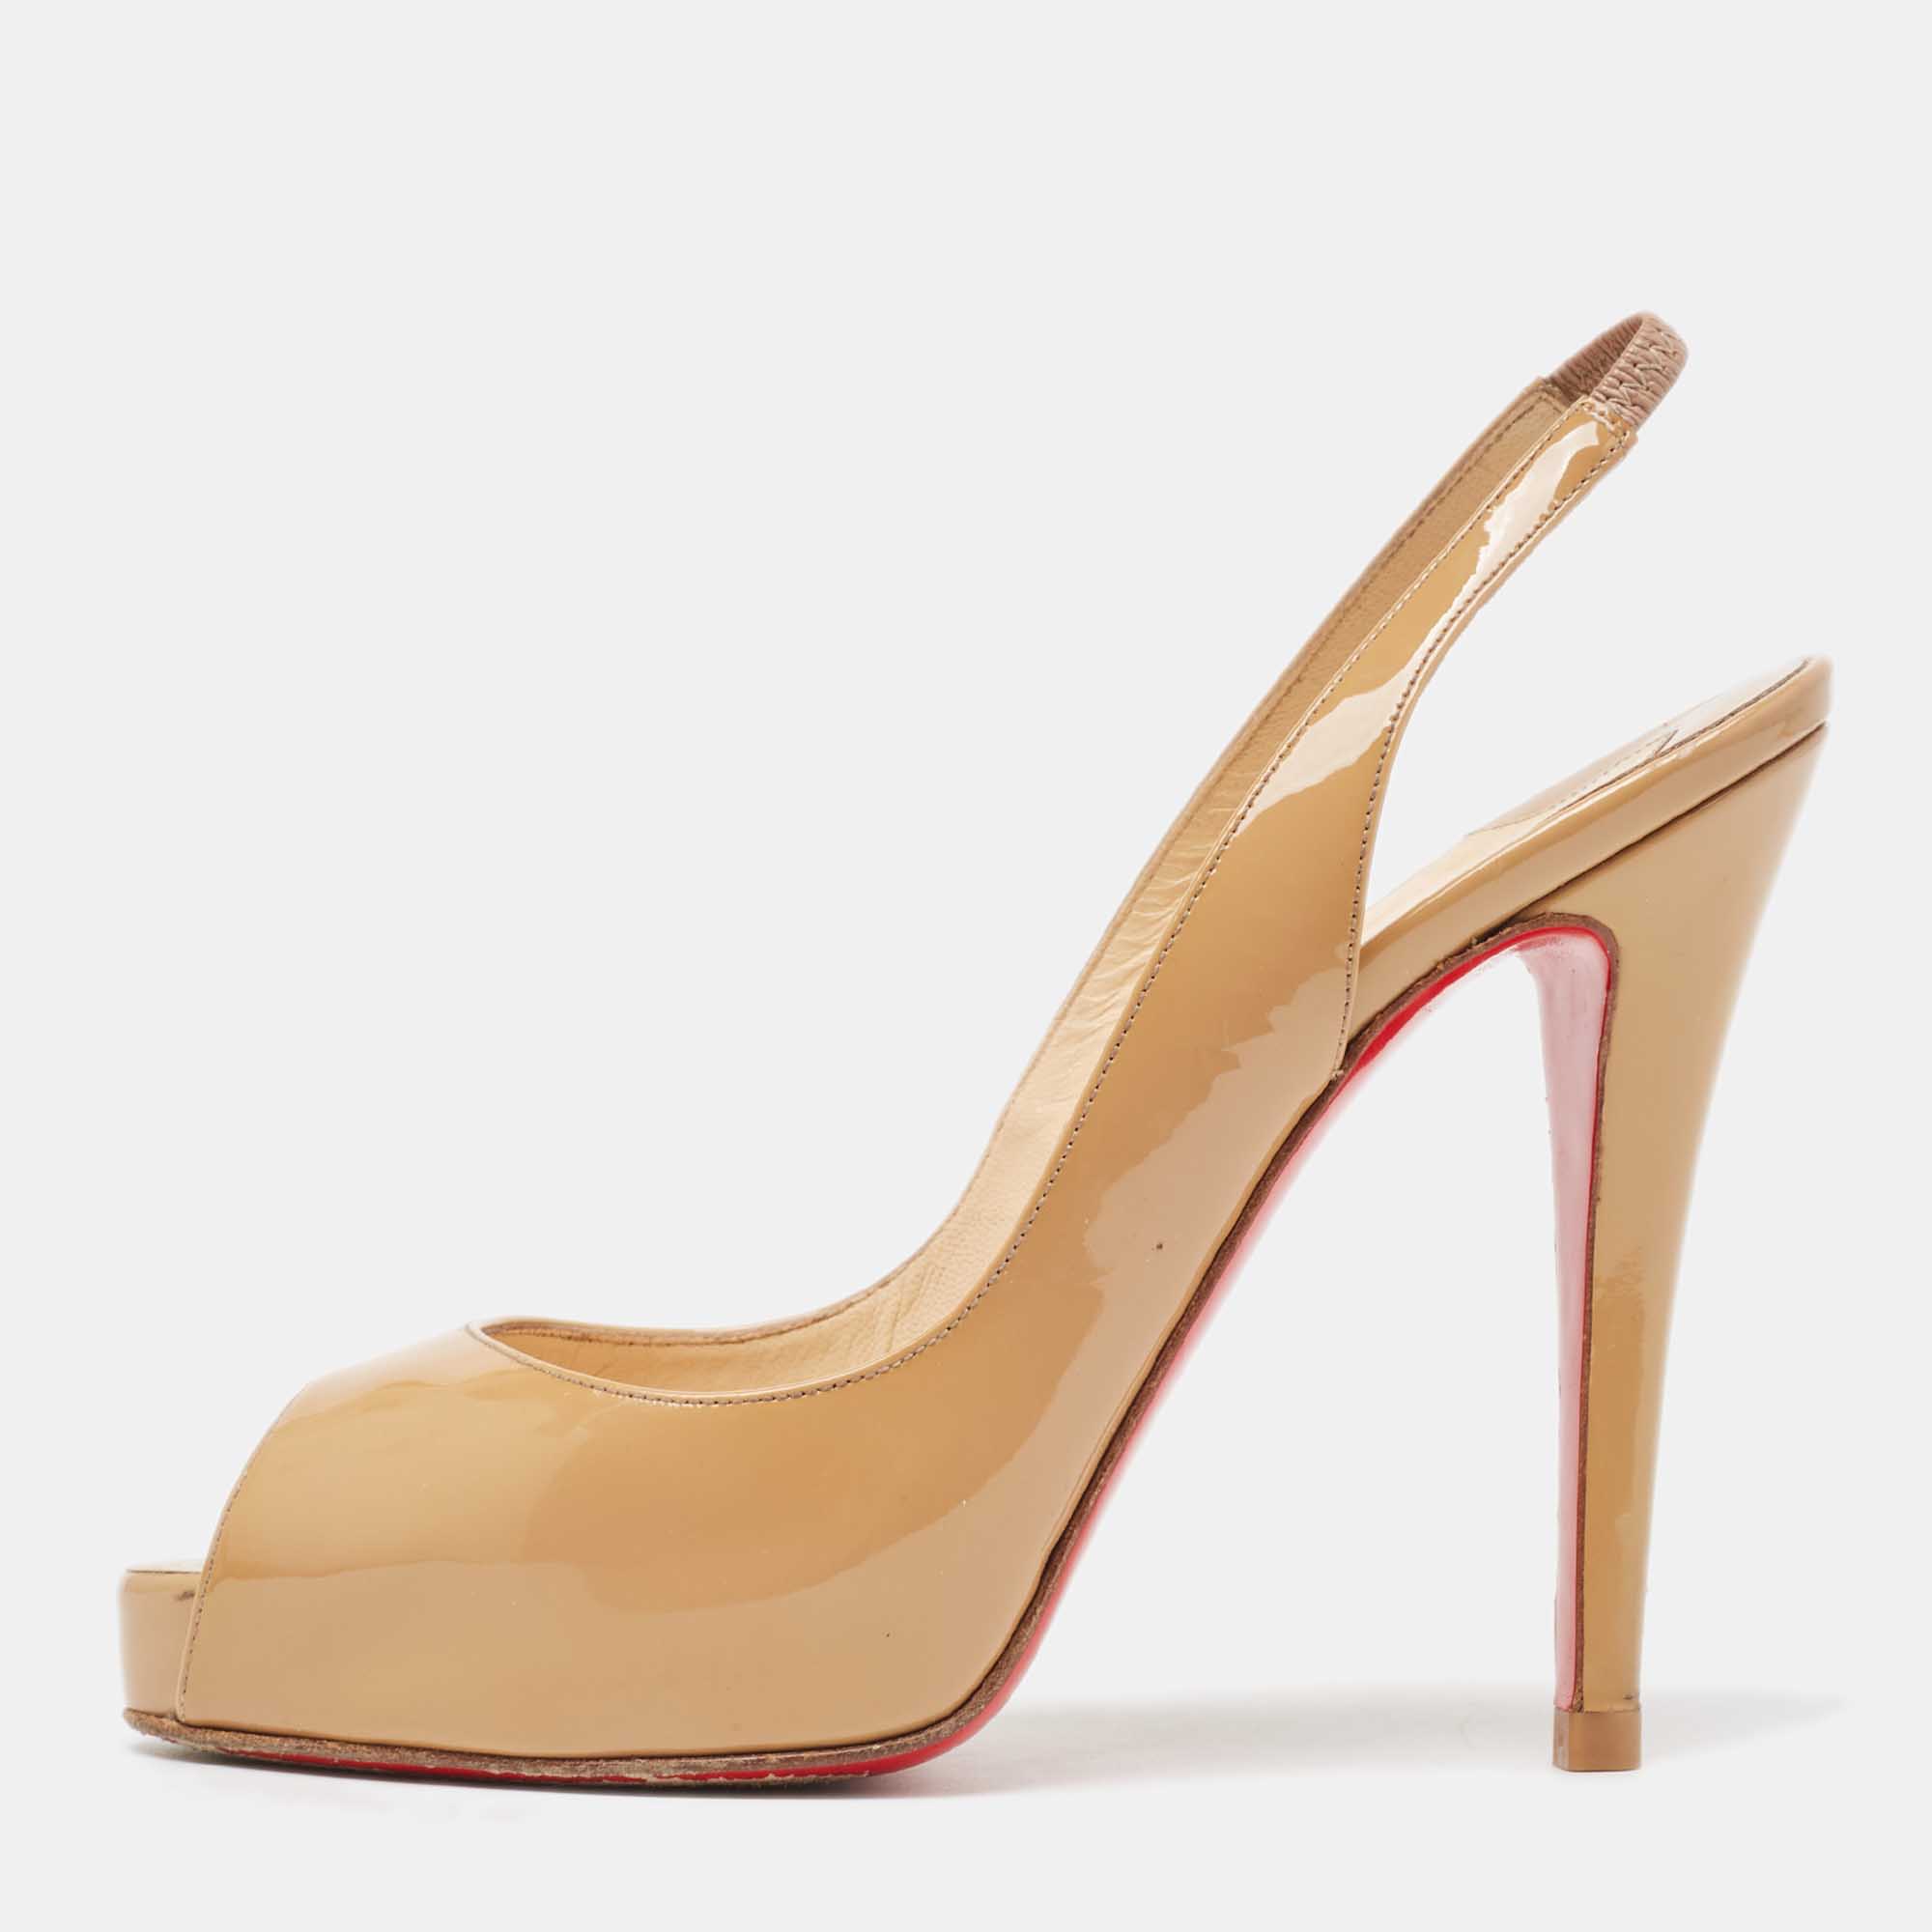 Christian louboutin beige patent leather no prive slingback pumps size 37